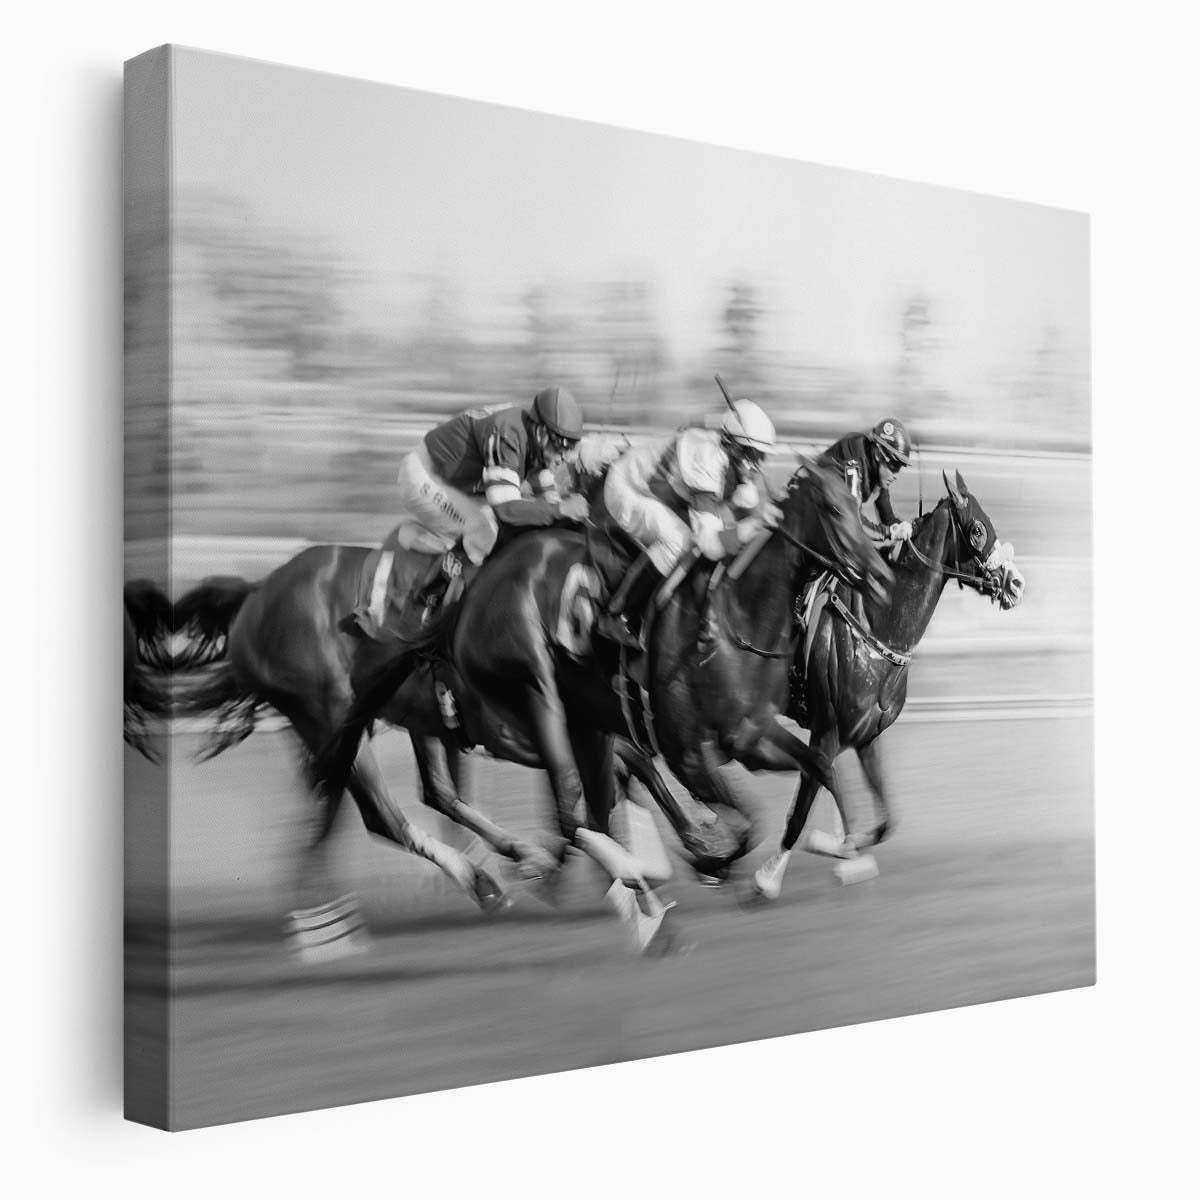 Dynamic Equestrian Race Speed & Motion Wall Art by Luxuriance Designs. Made in USA.